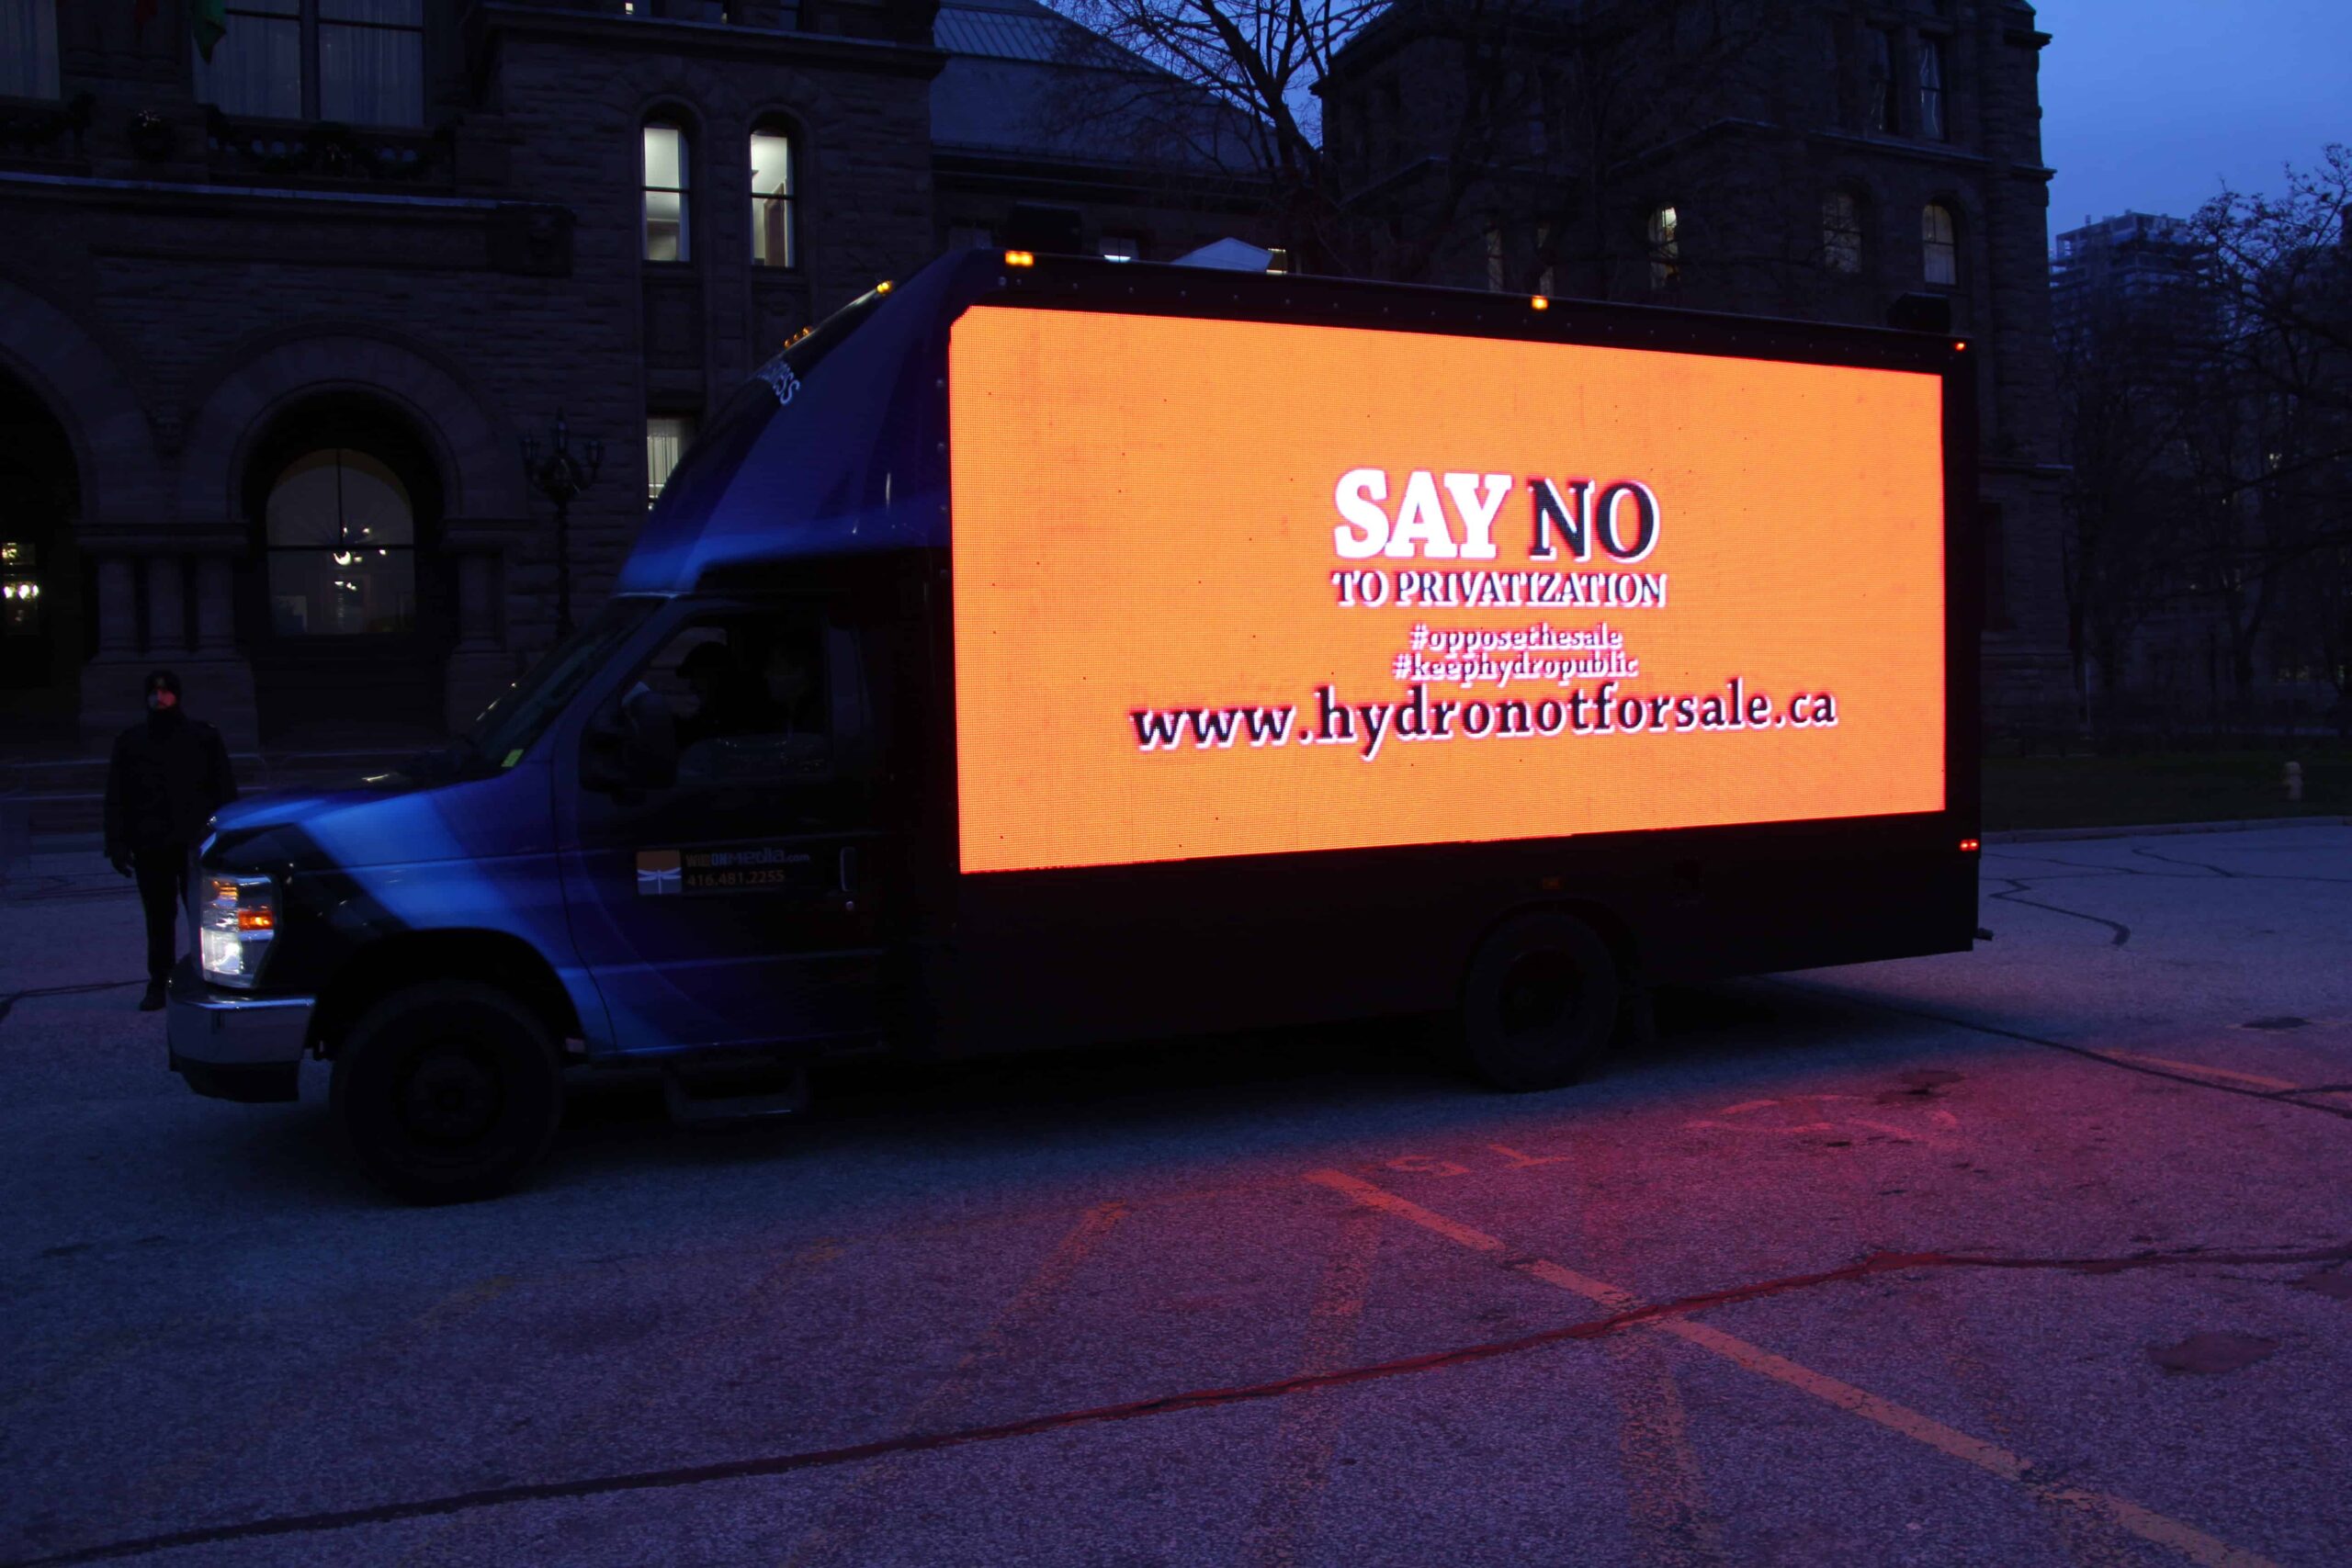 Digital Video Truck Ads company in Vancouver